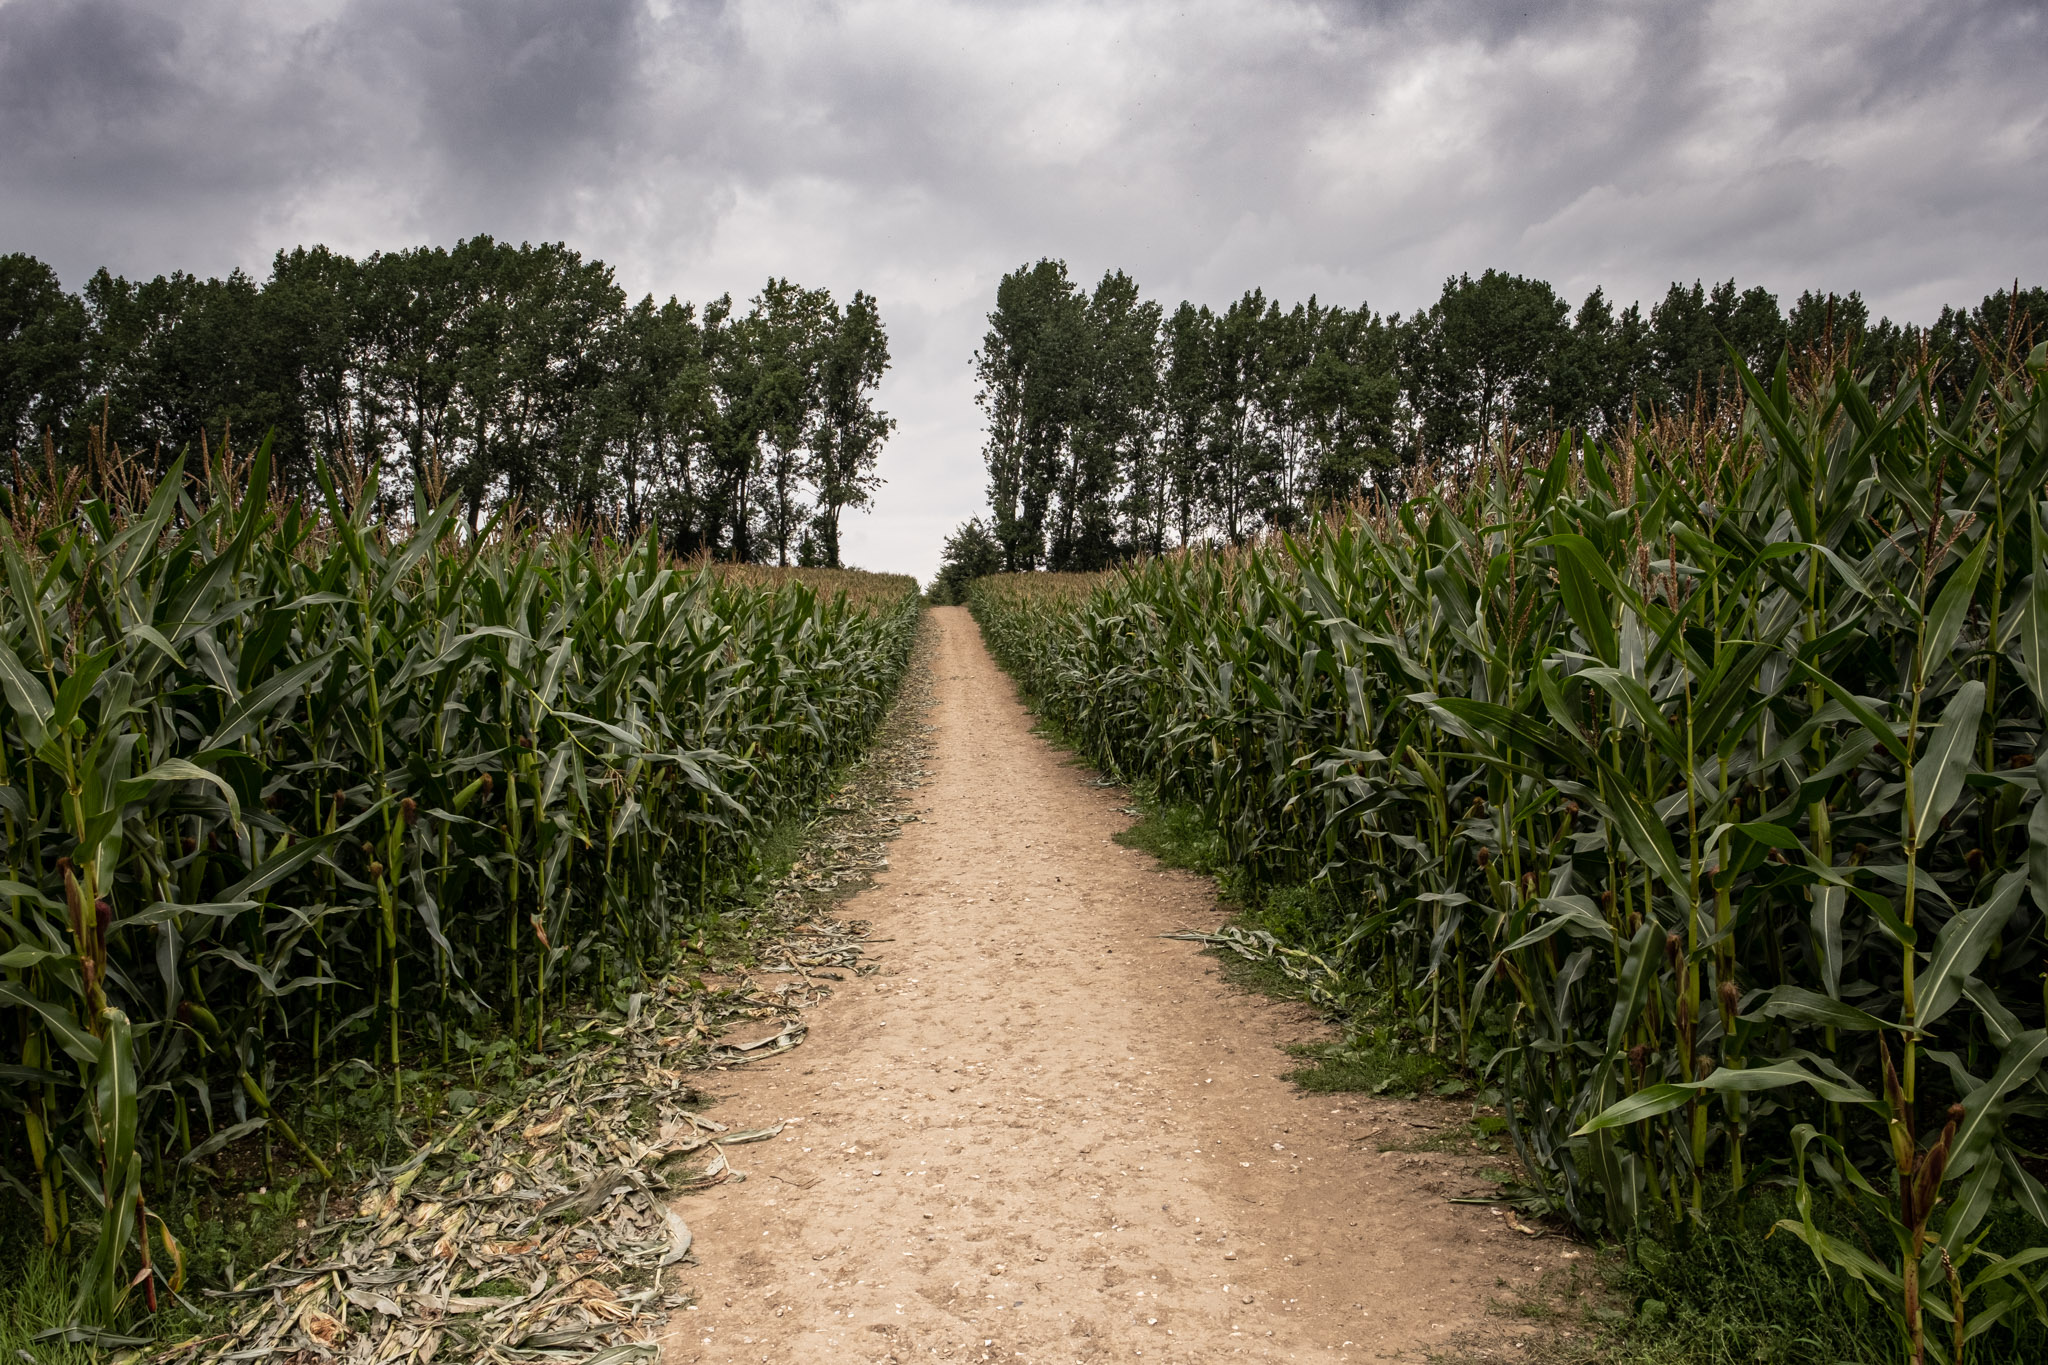 Path through maize field with trees on the horizon